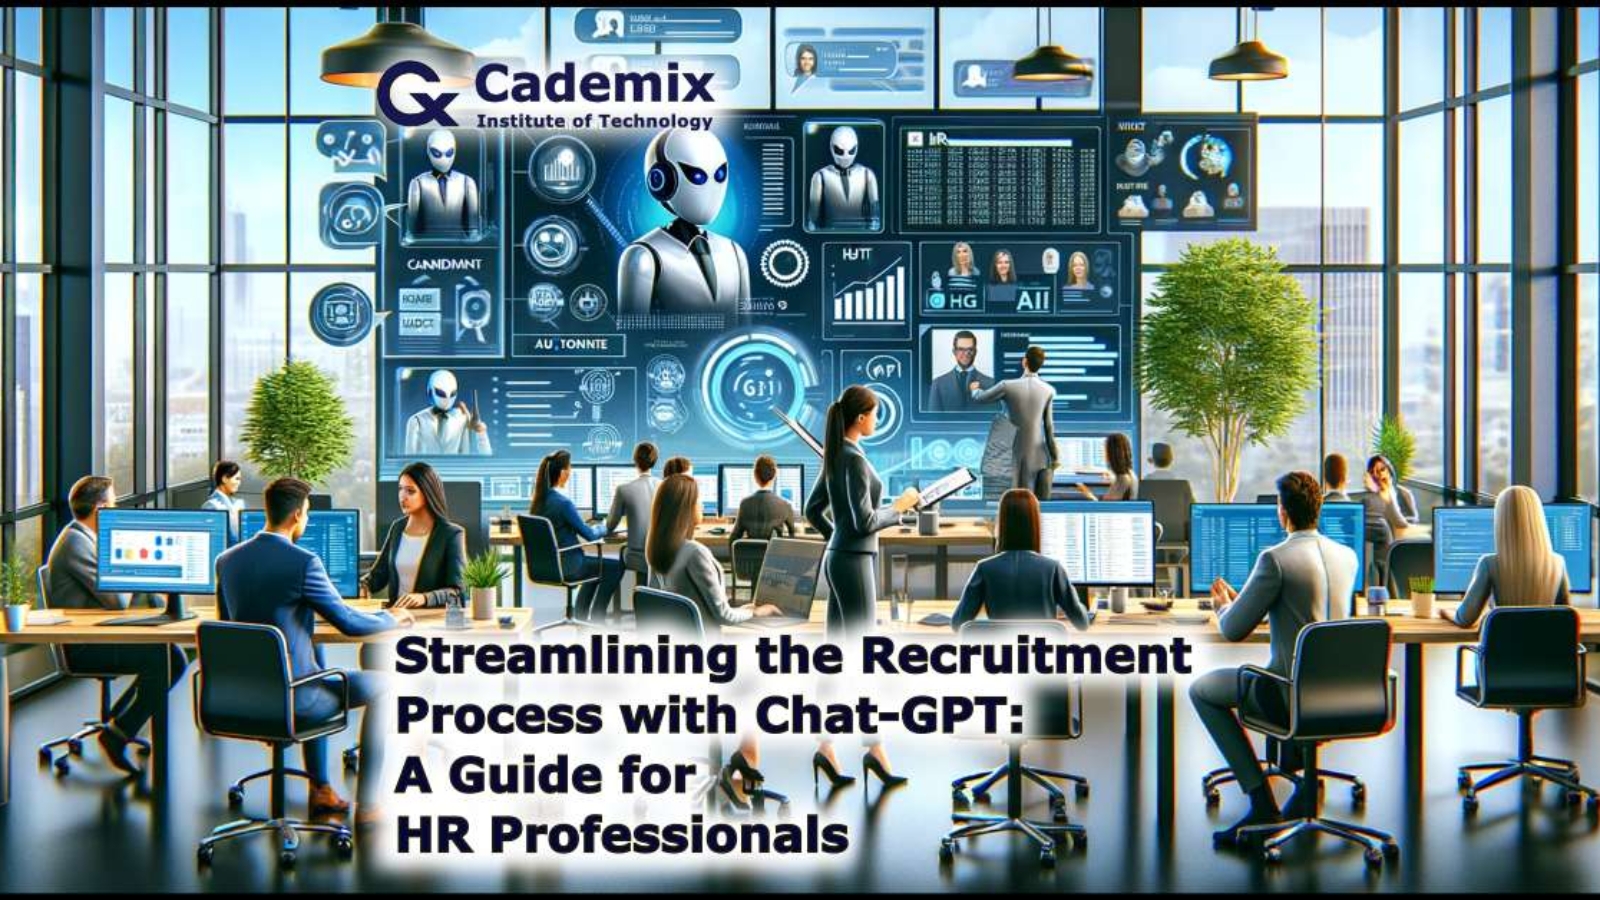 This image illustrating the use of Chat-GPT to streamline the recruitment process for HR professionals is now available. It shows a modern office setting where HR staff utilize AI tools to enhance various aspects of the recruitment workflow.